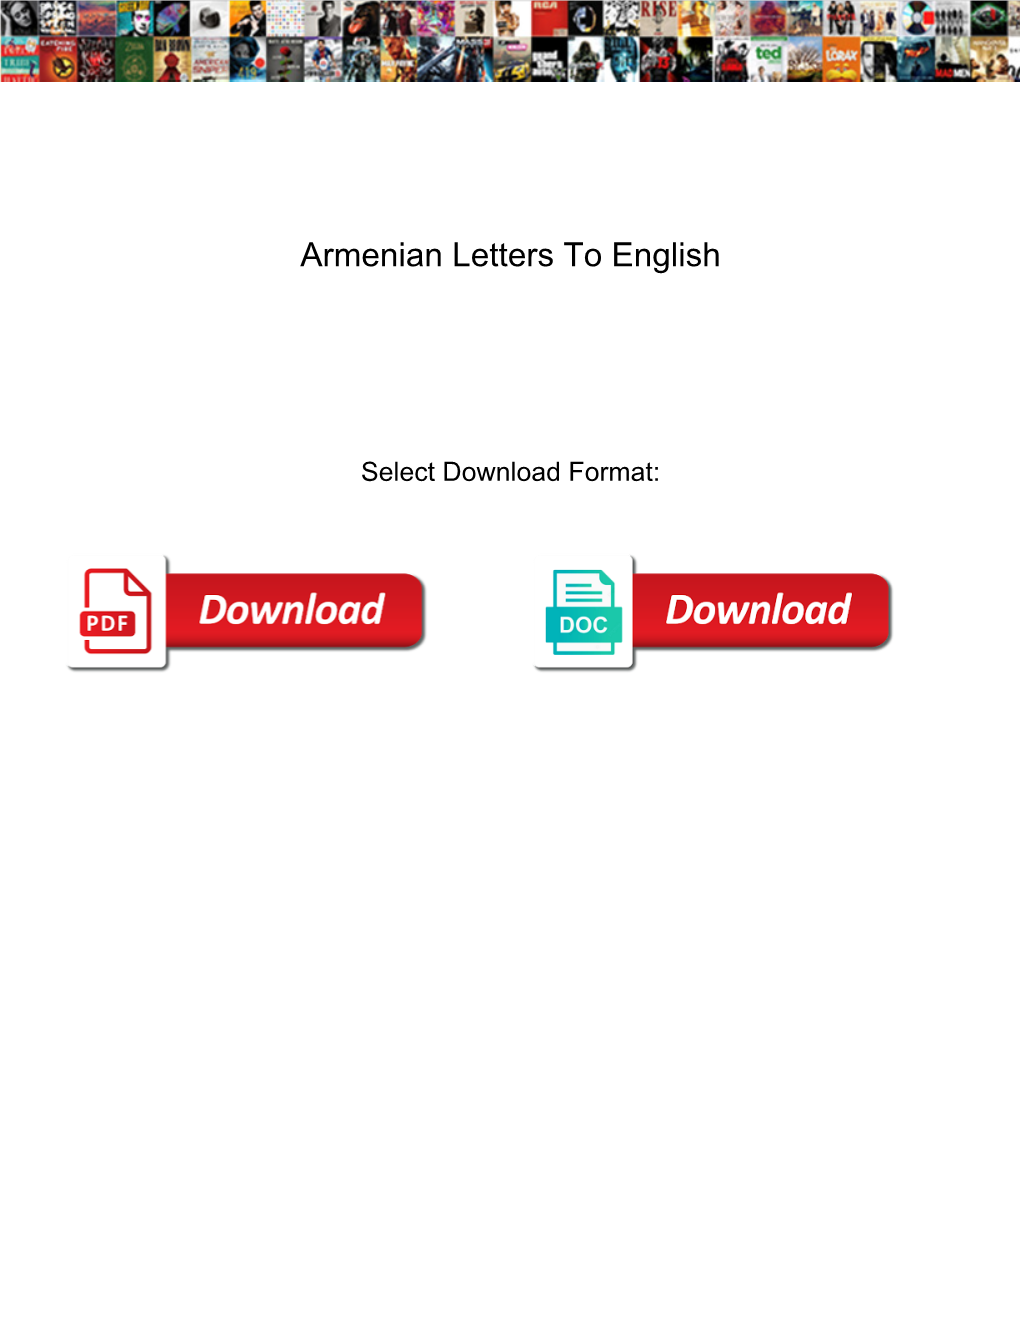 Armenian Letters to English